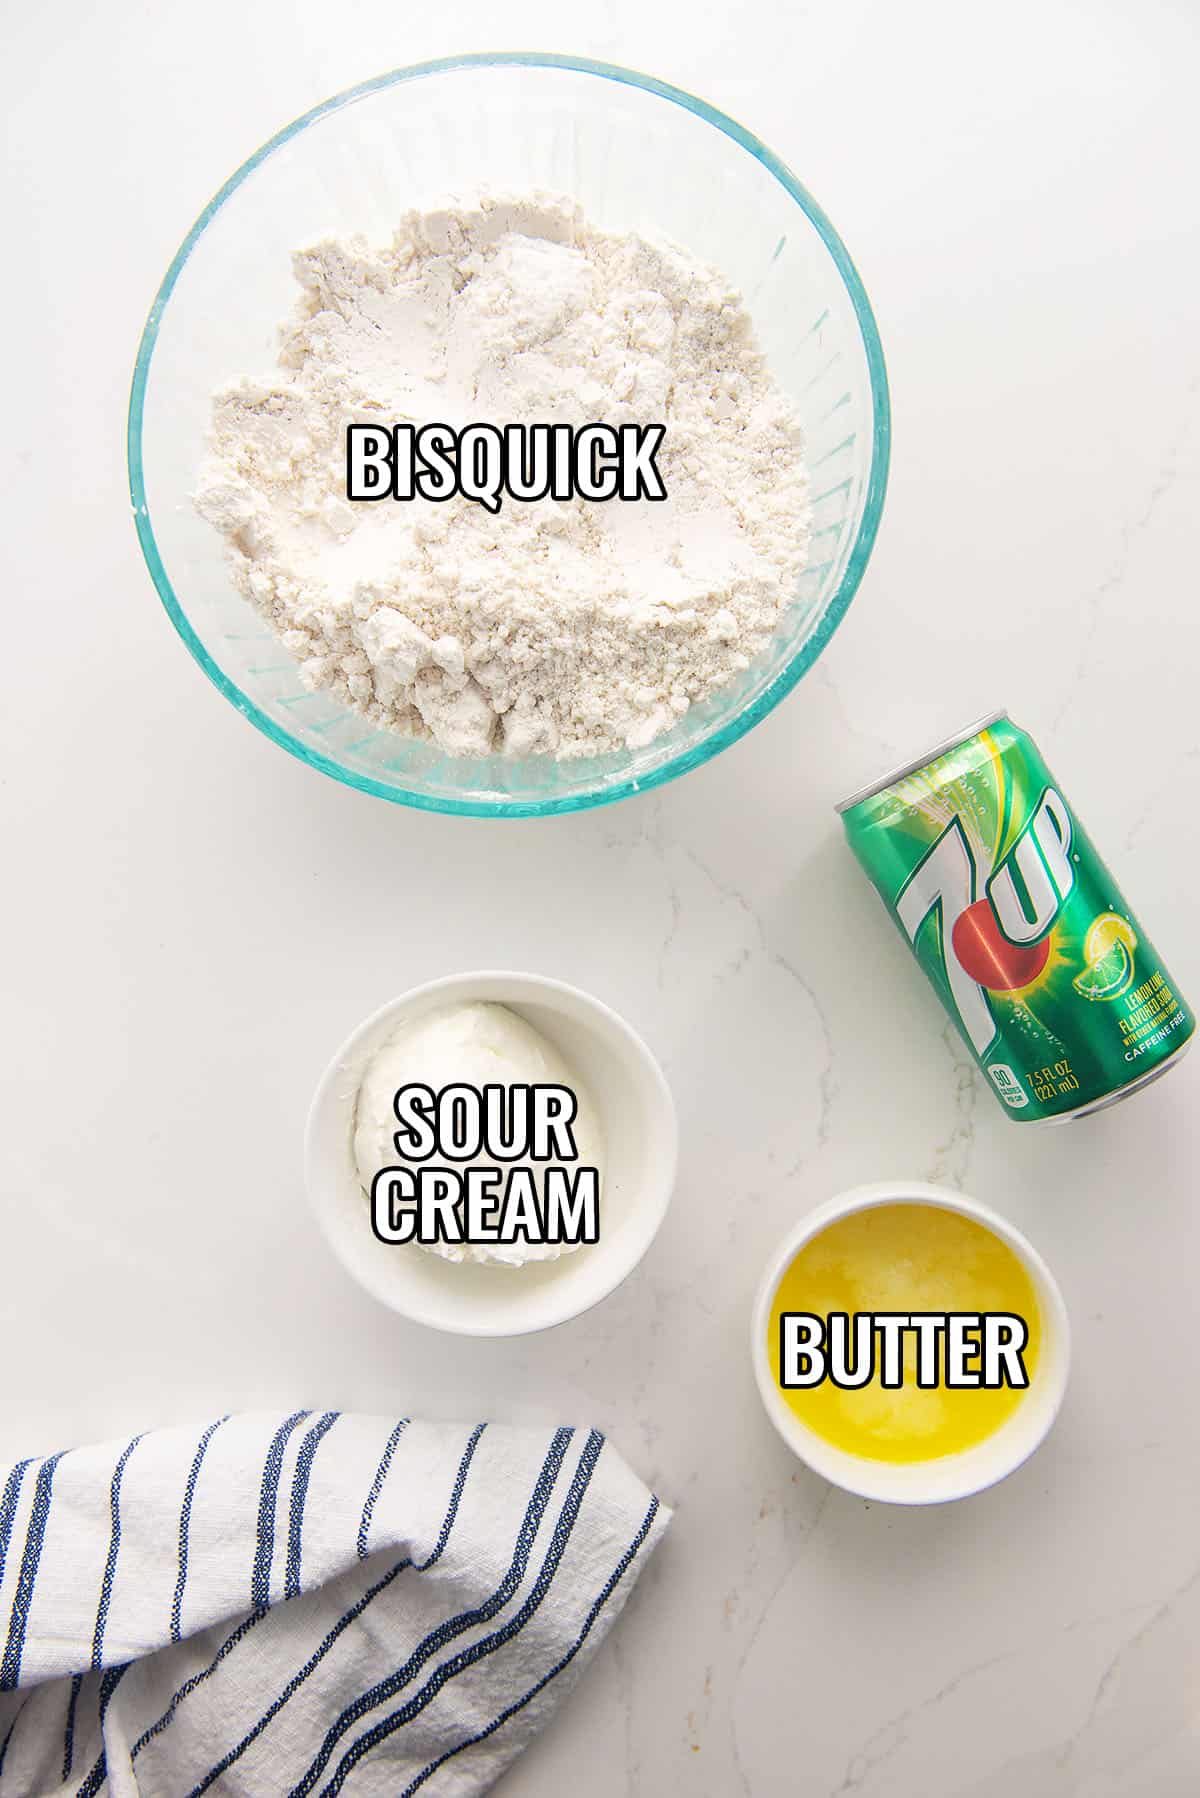 ingredients for 7 up biscuit recipe.